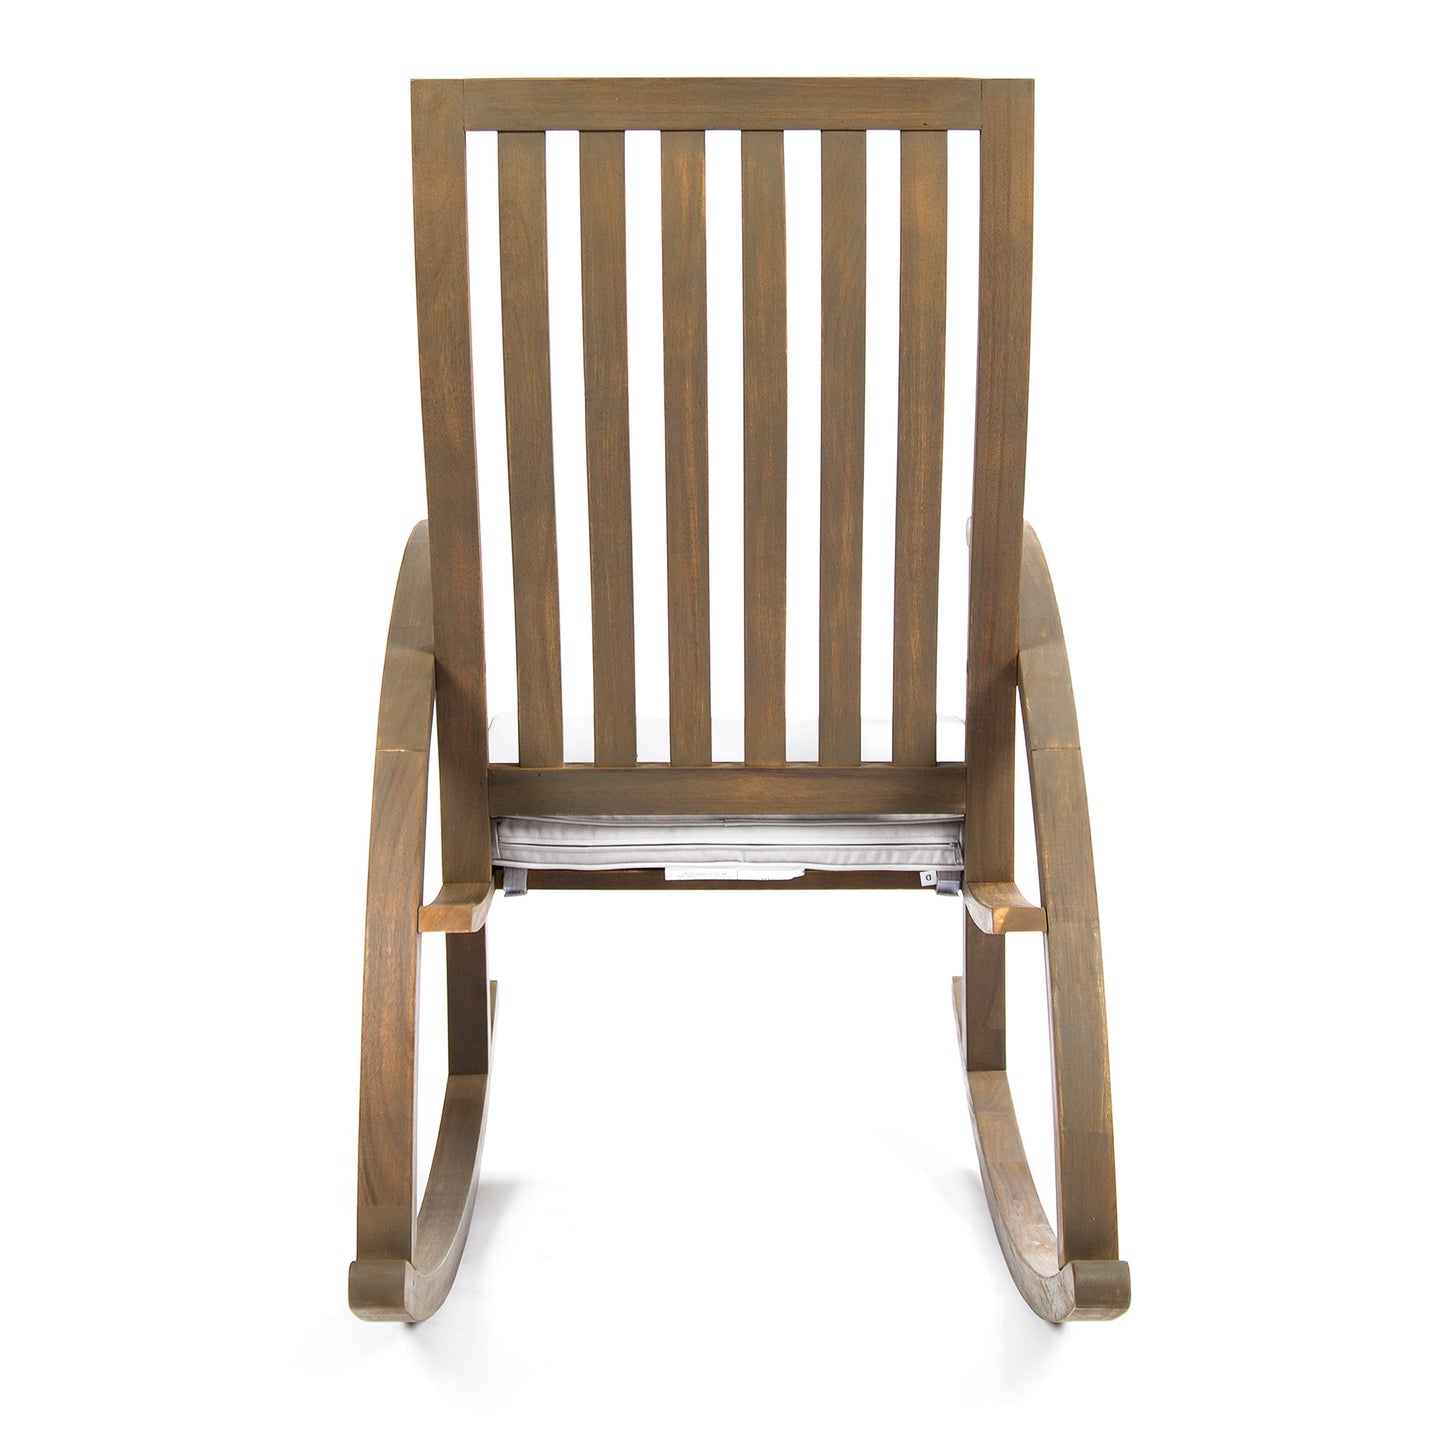 Cattan Outdoor Acacia Wood Rocking Chair with Water Resistant Cushion